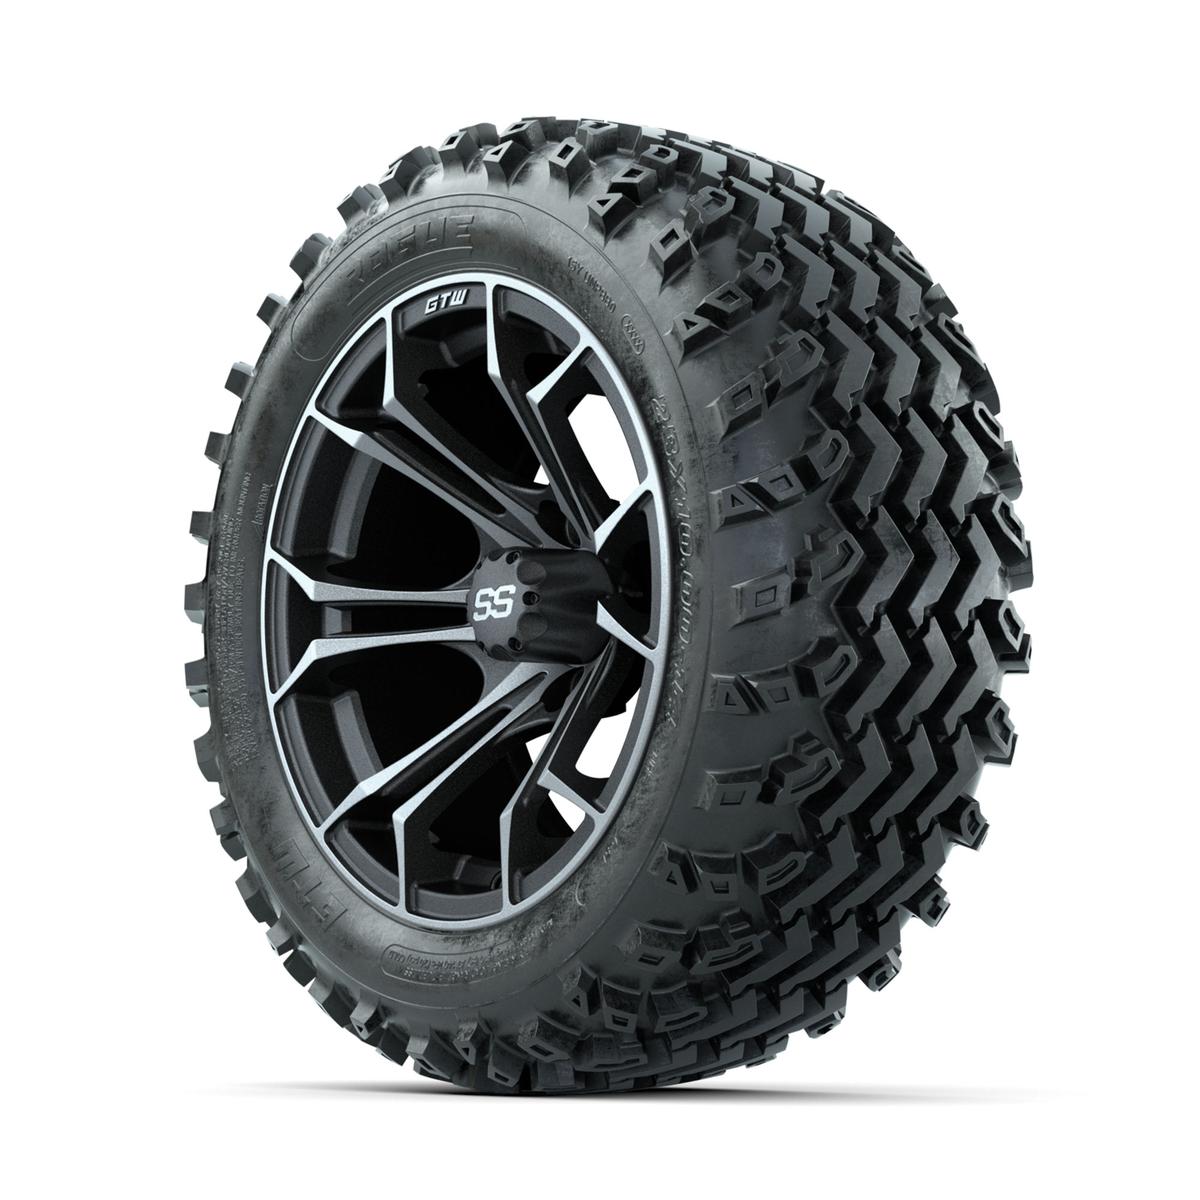 GTW Spyder Machined/Grey 14 in Wheels with 23x10.00-14 Rogue All Terrain Tires – Full Set